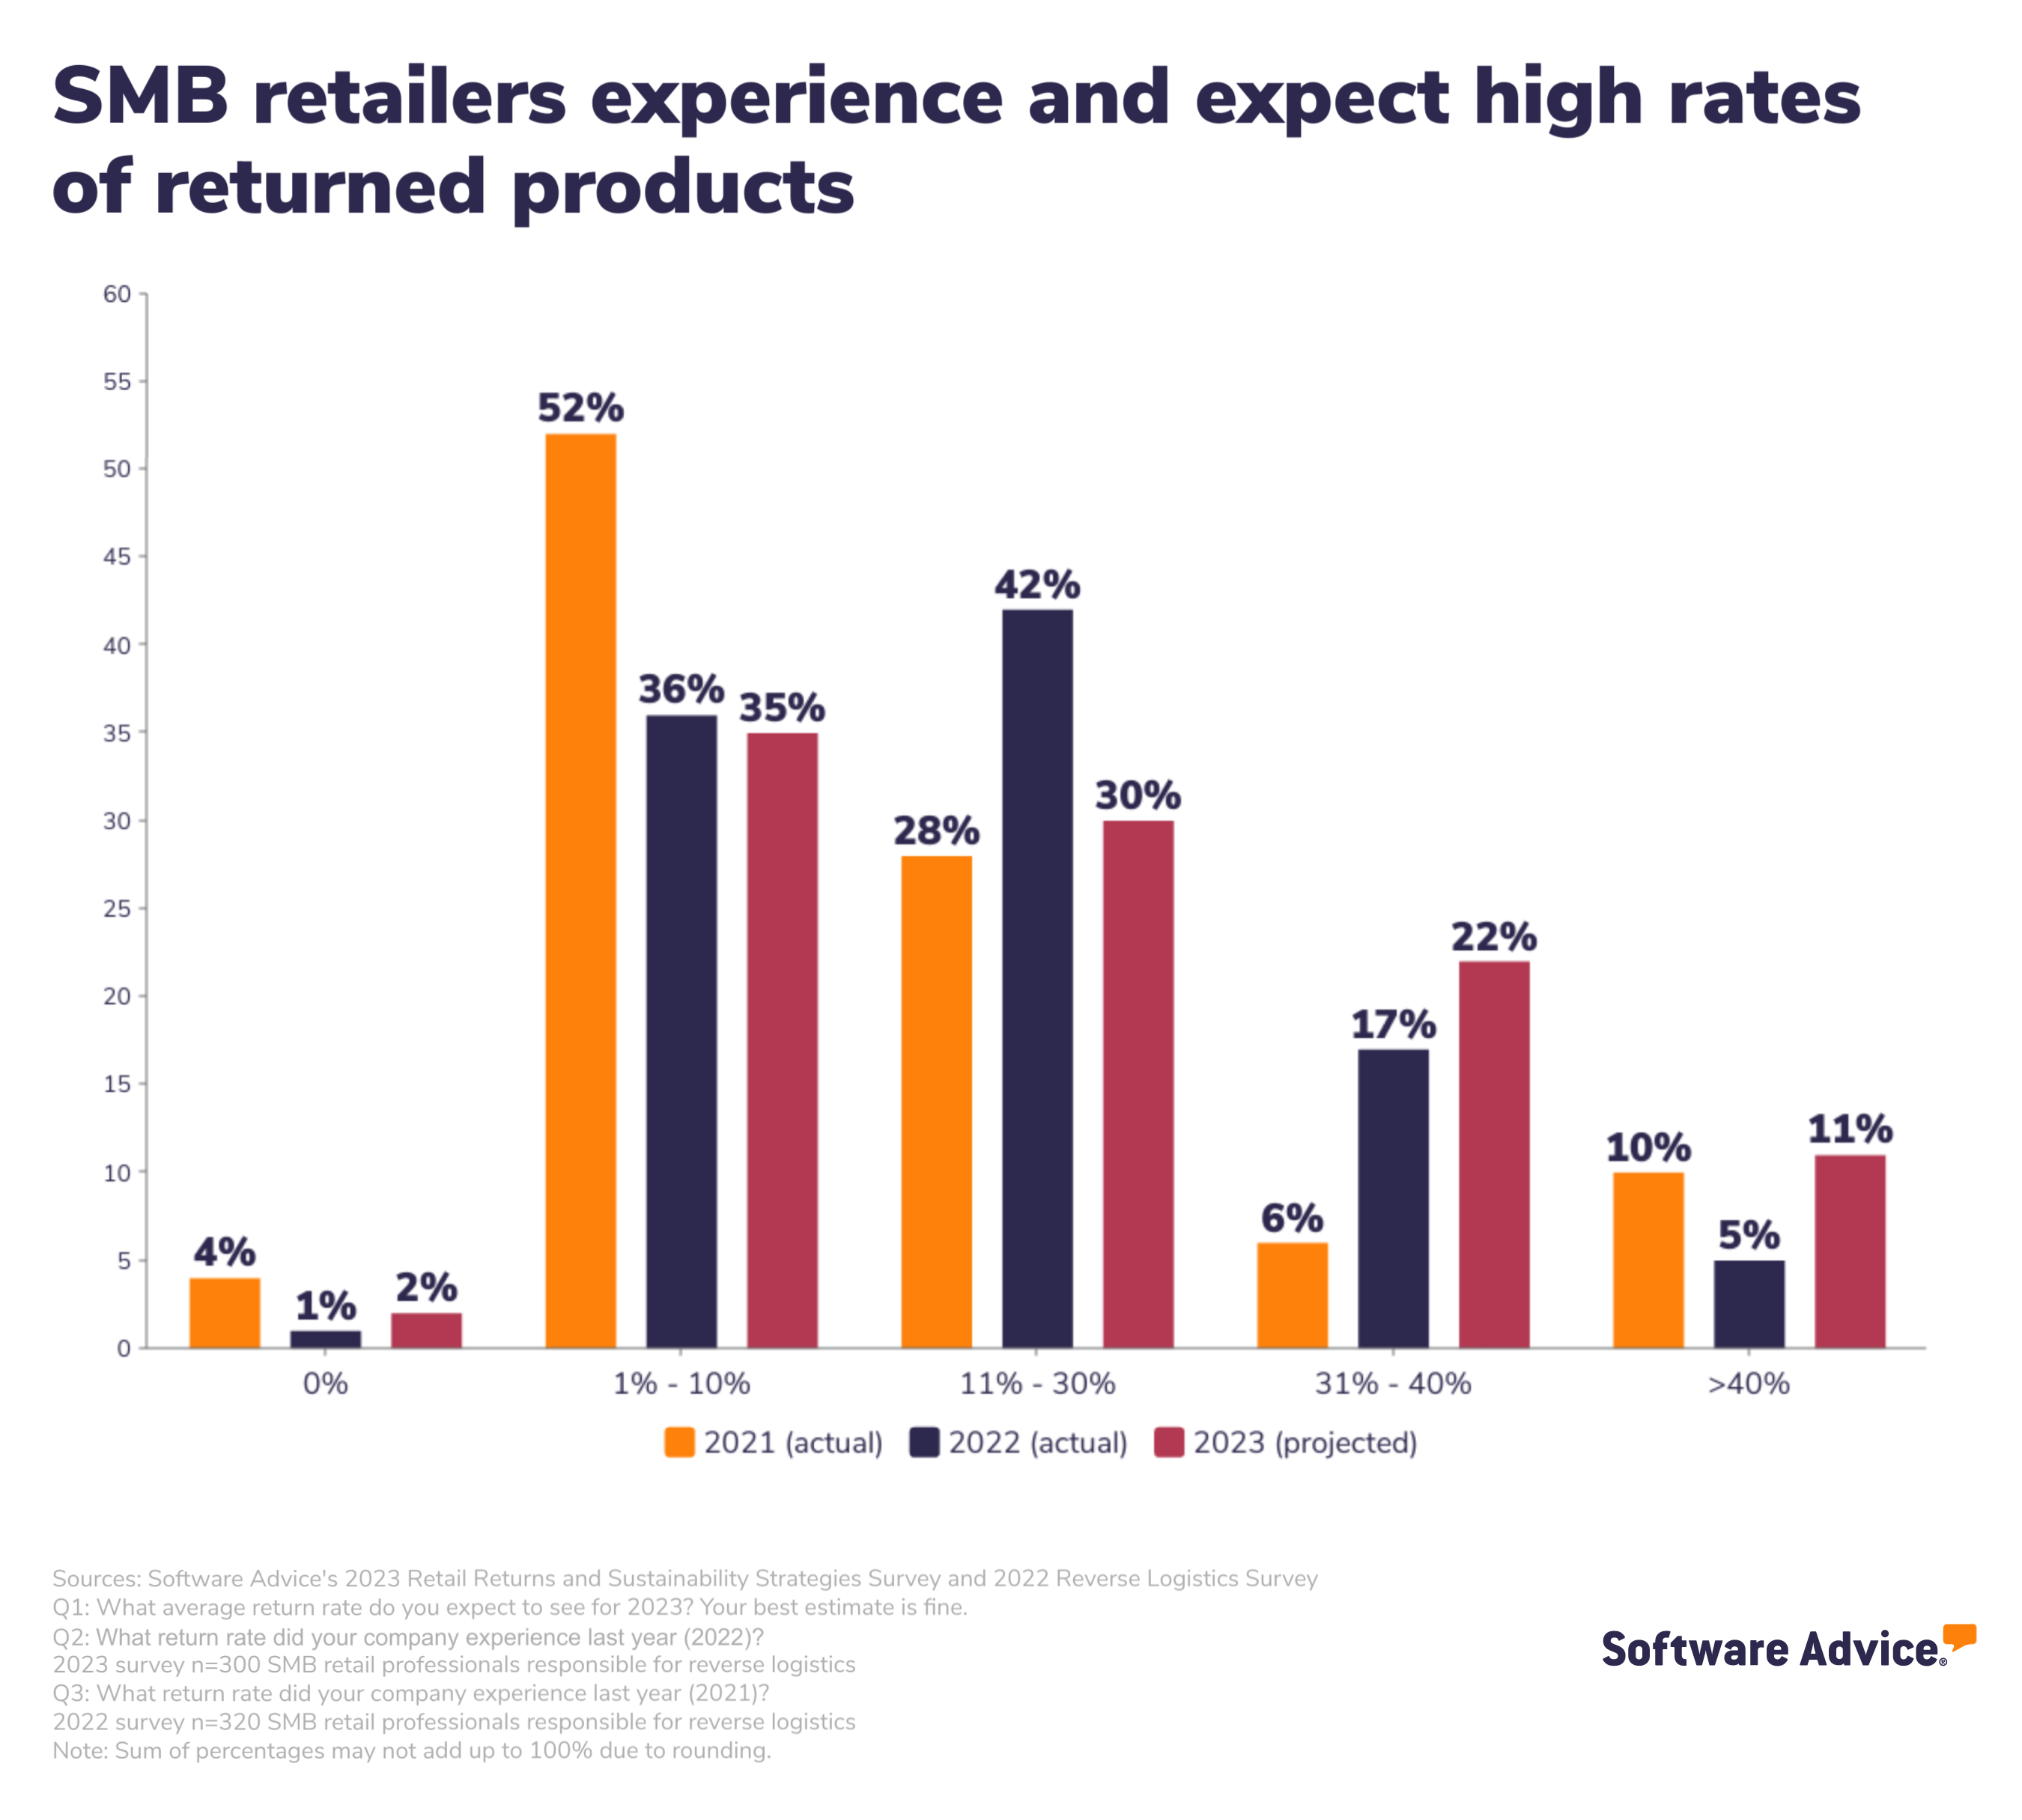 Small and midsize retailers experience and expect high rates of returned products